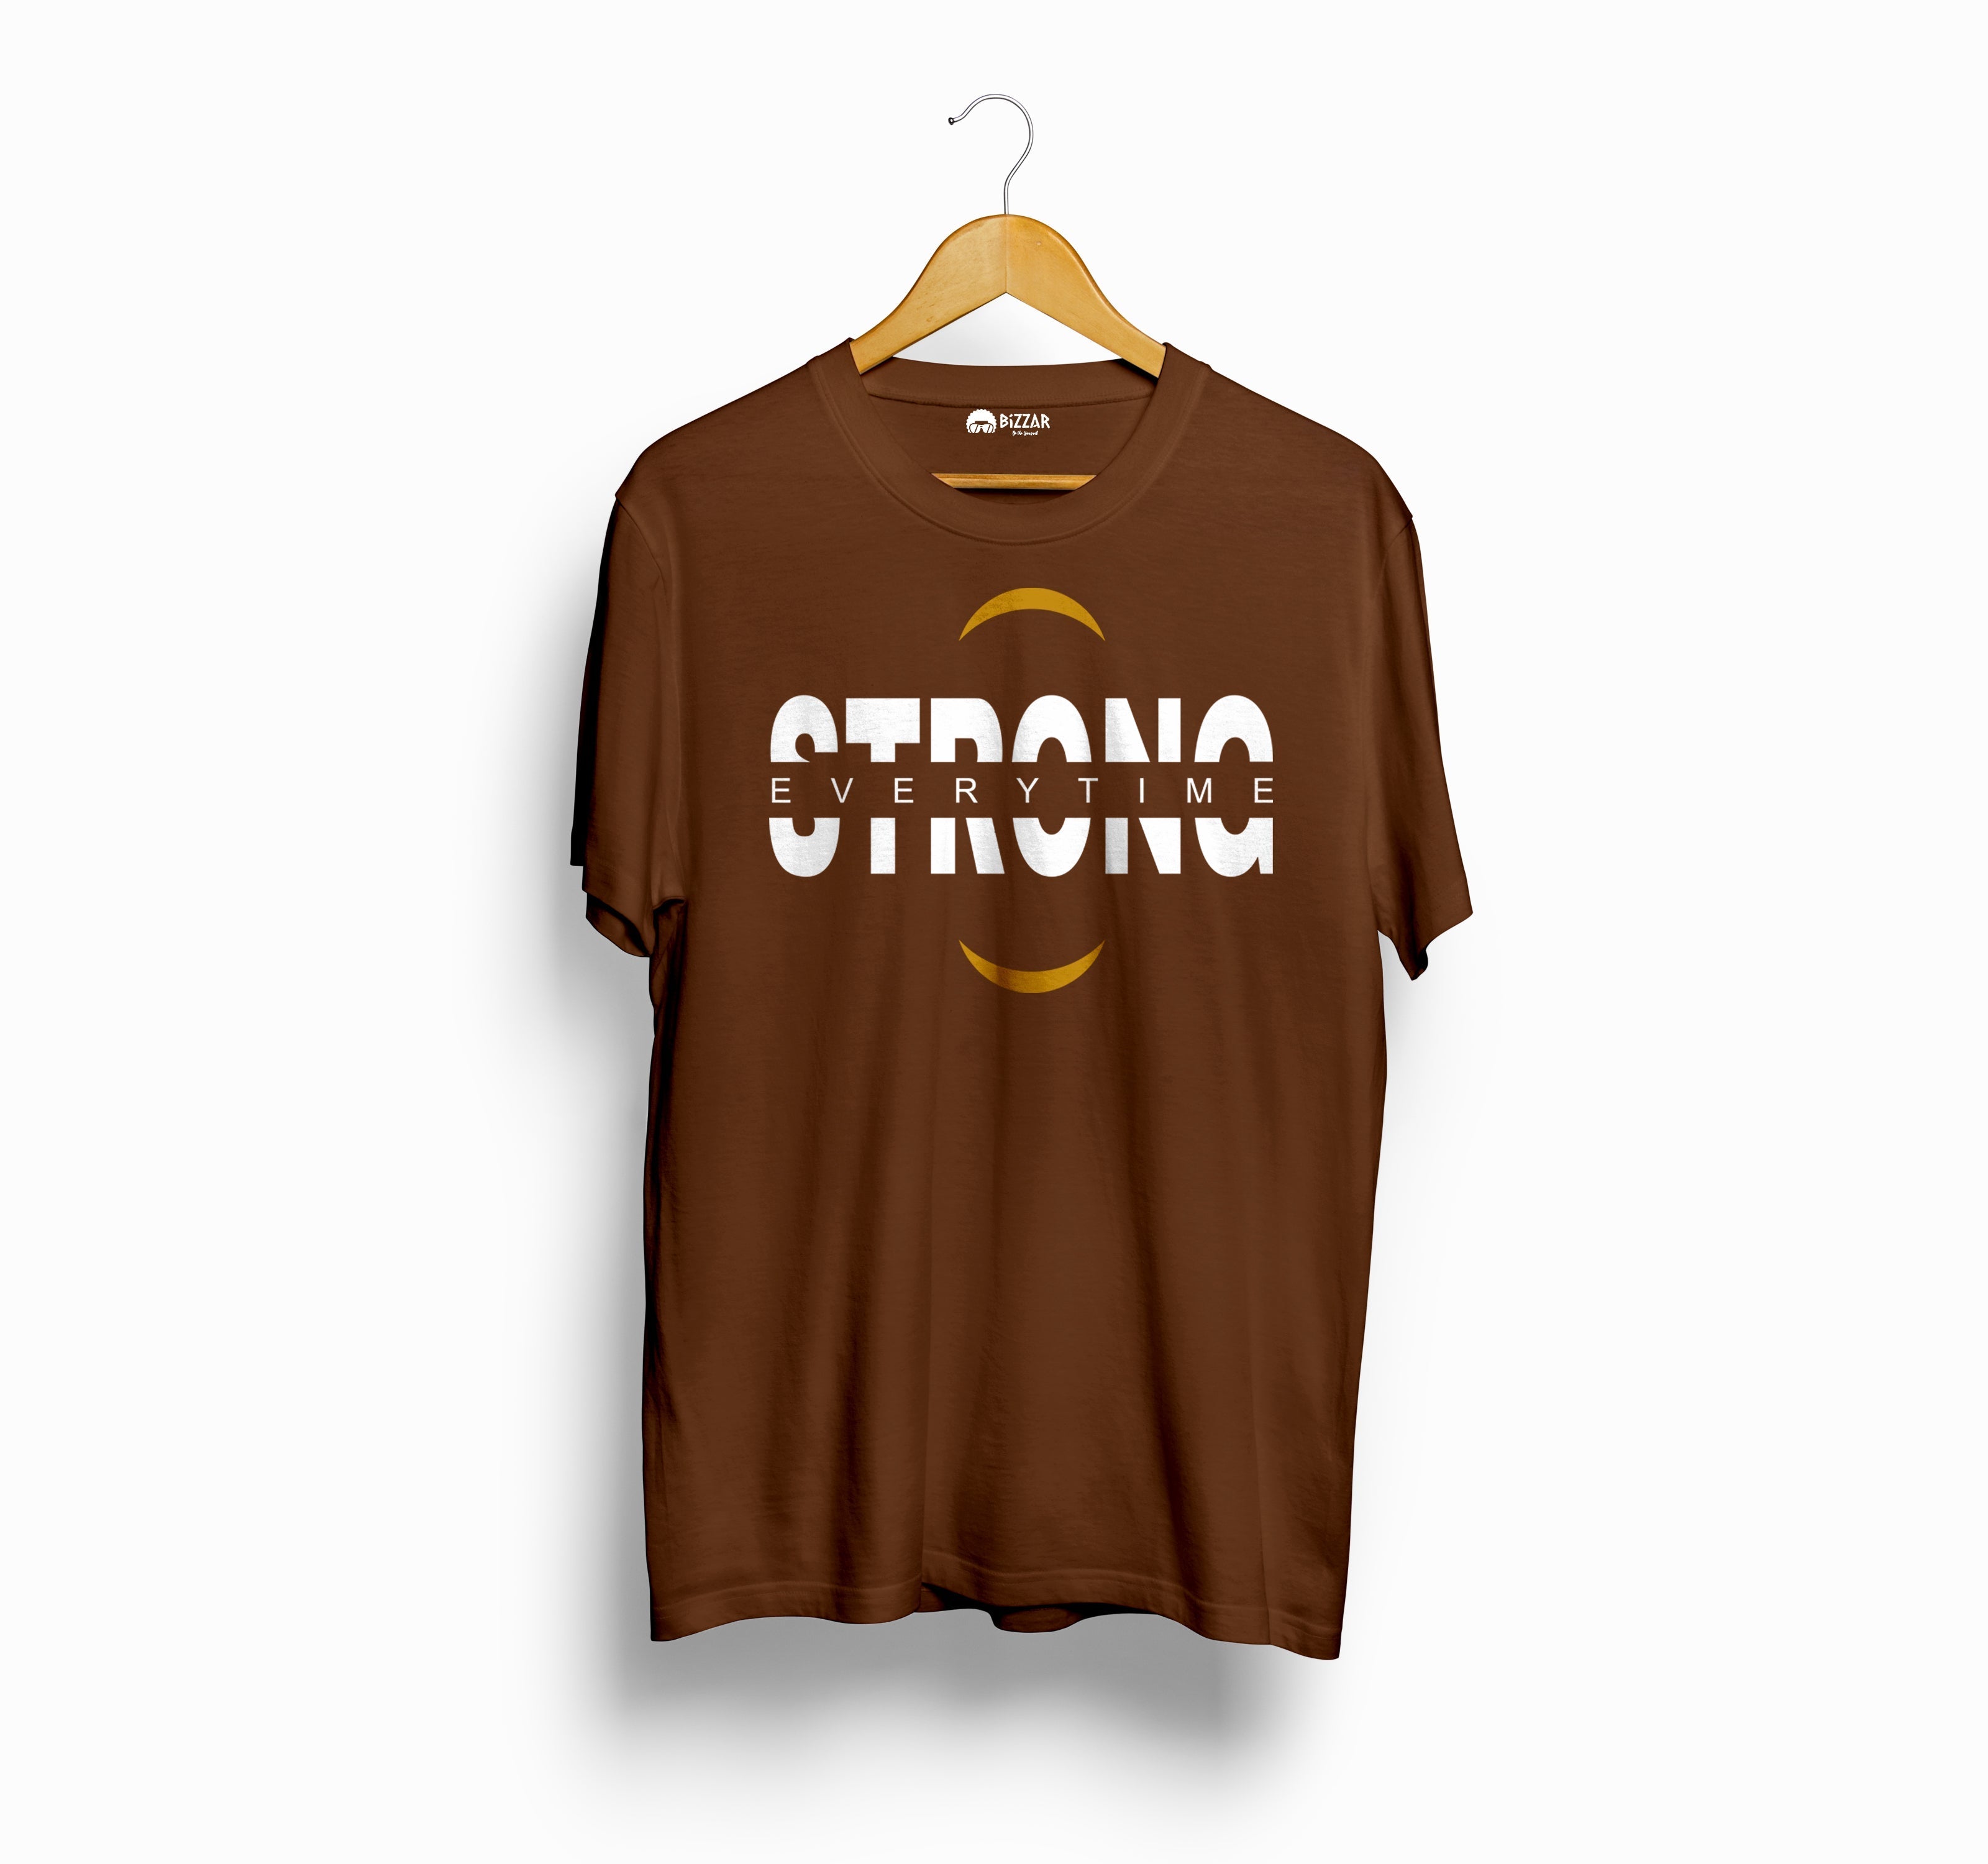 Bizzar's Strong Coffee Brown T-Shirt